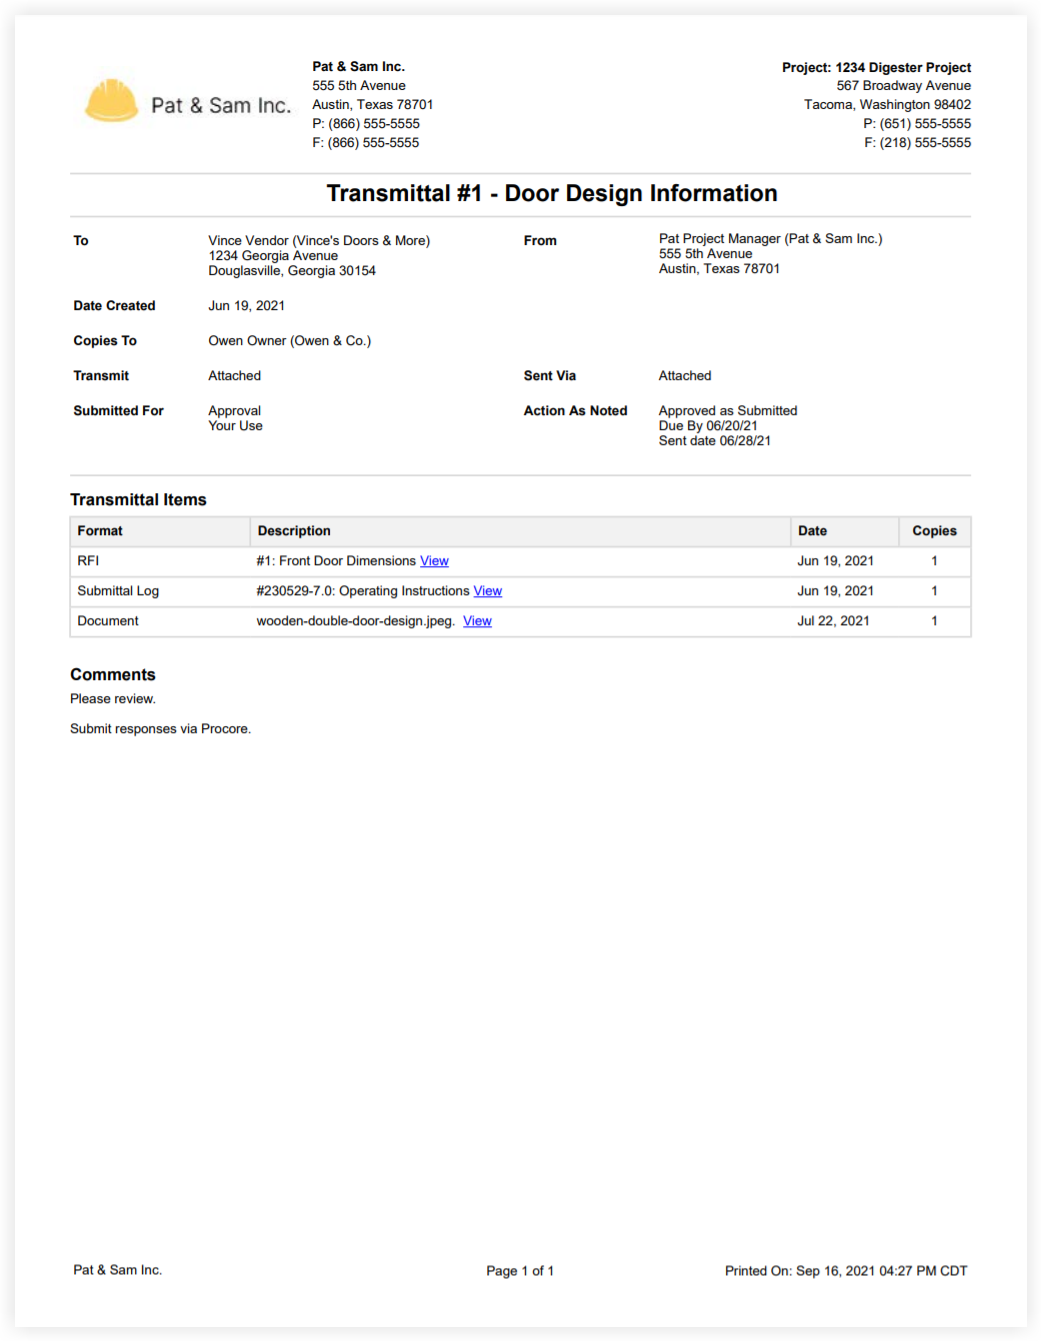 transmittals-ann-updated-pdf-export.png